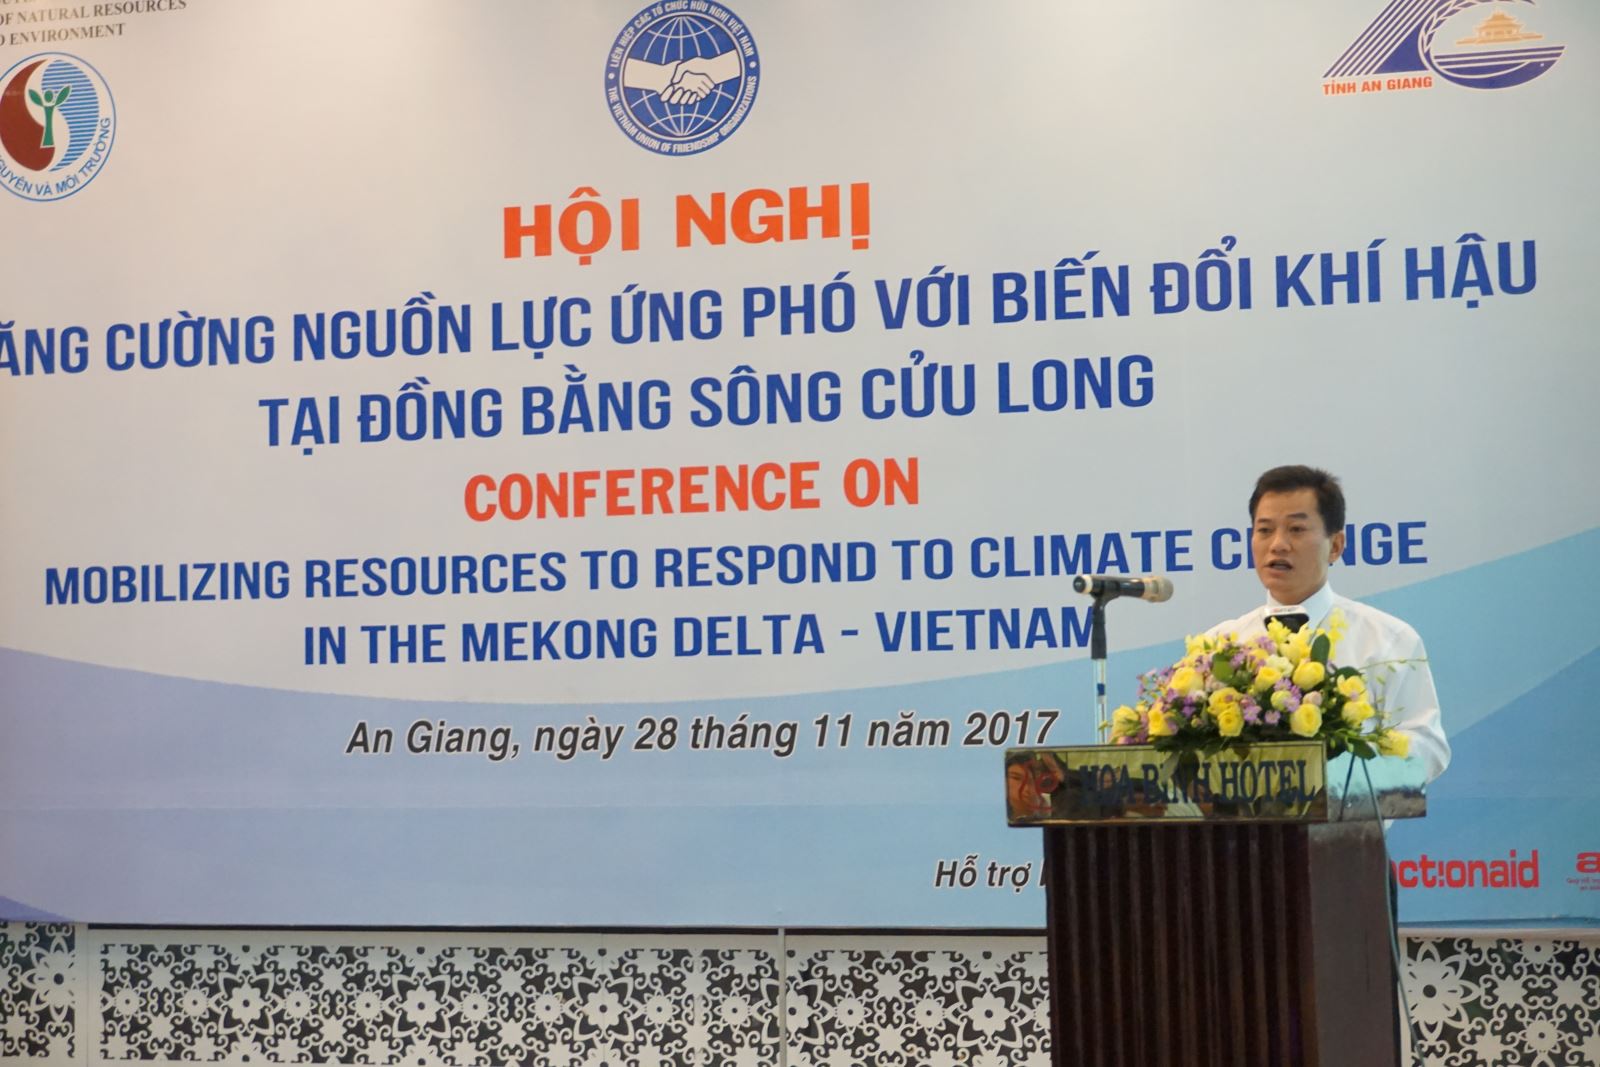 VUFO calls for resouces to respond to climate change in Mekong Delta